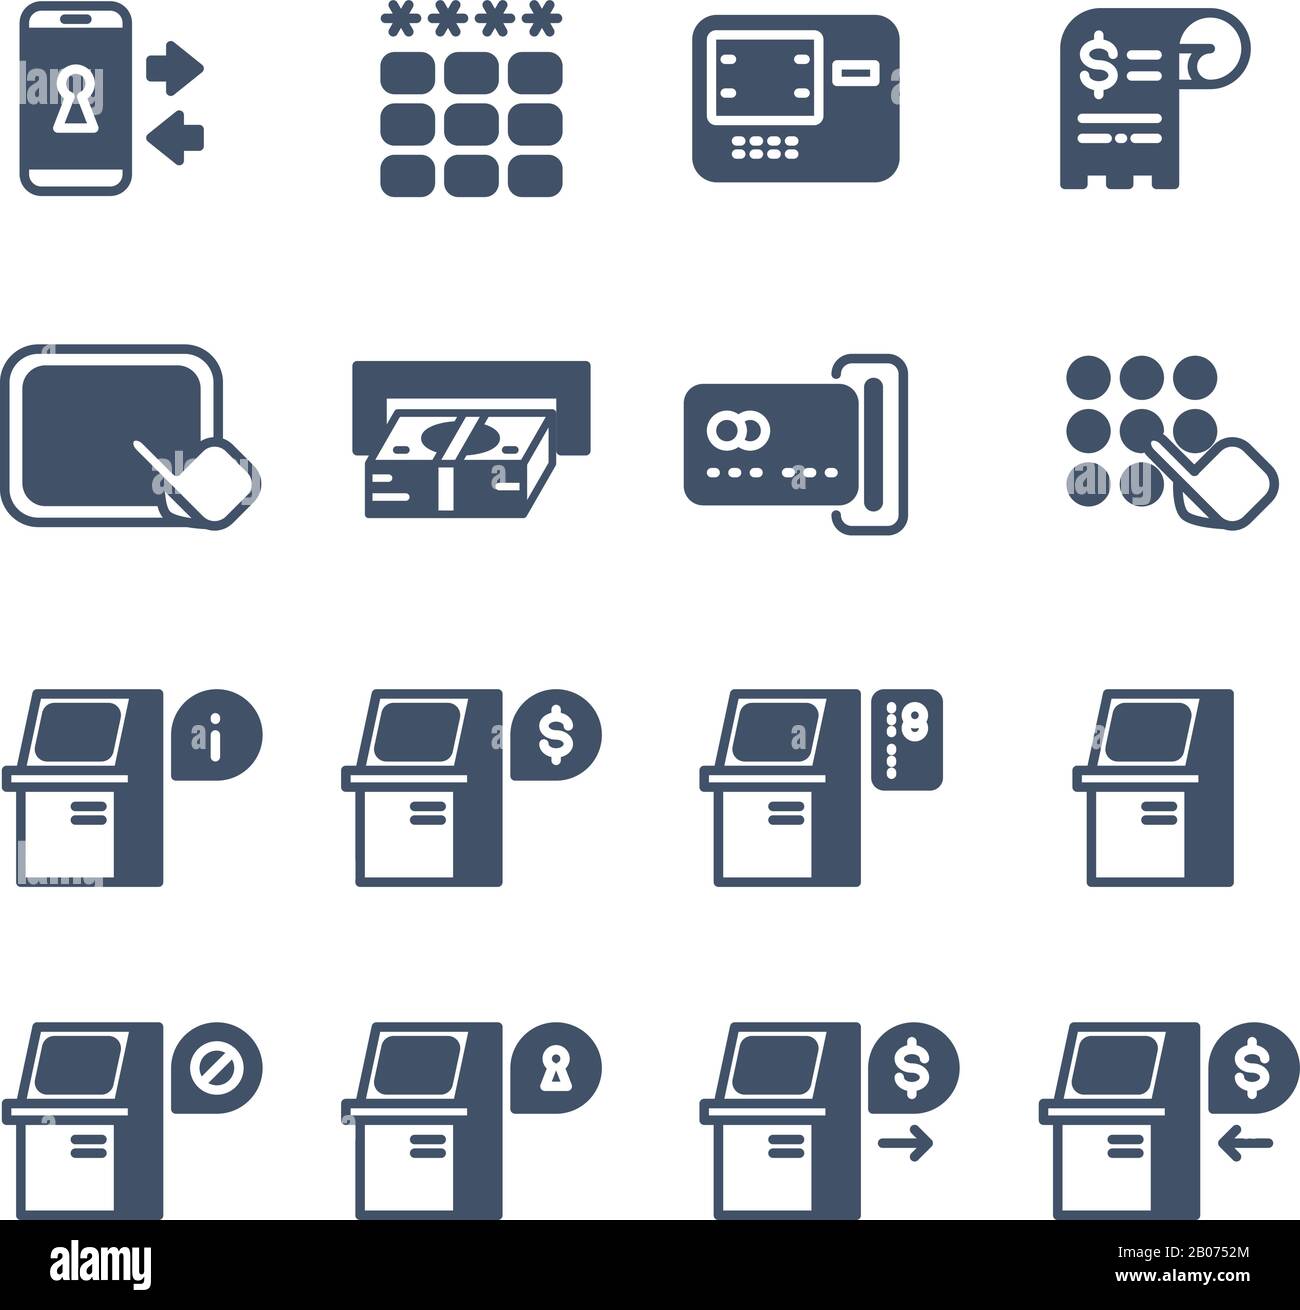 Kiosk terminal service info vector icons. Atm display with information illustration Stock Vector